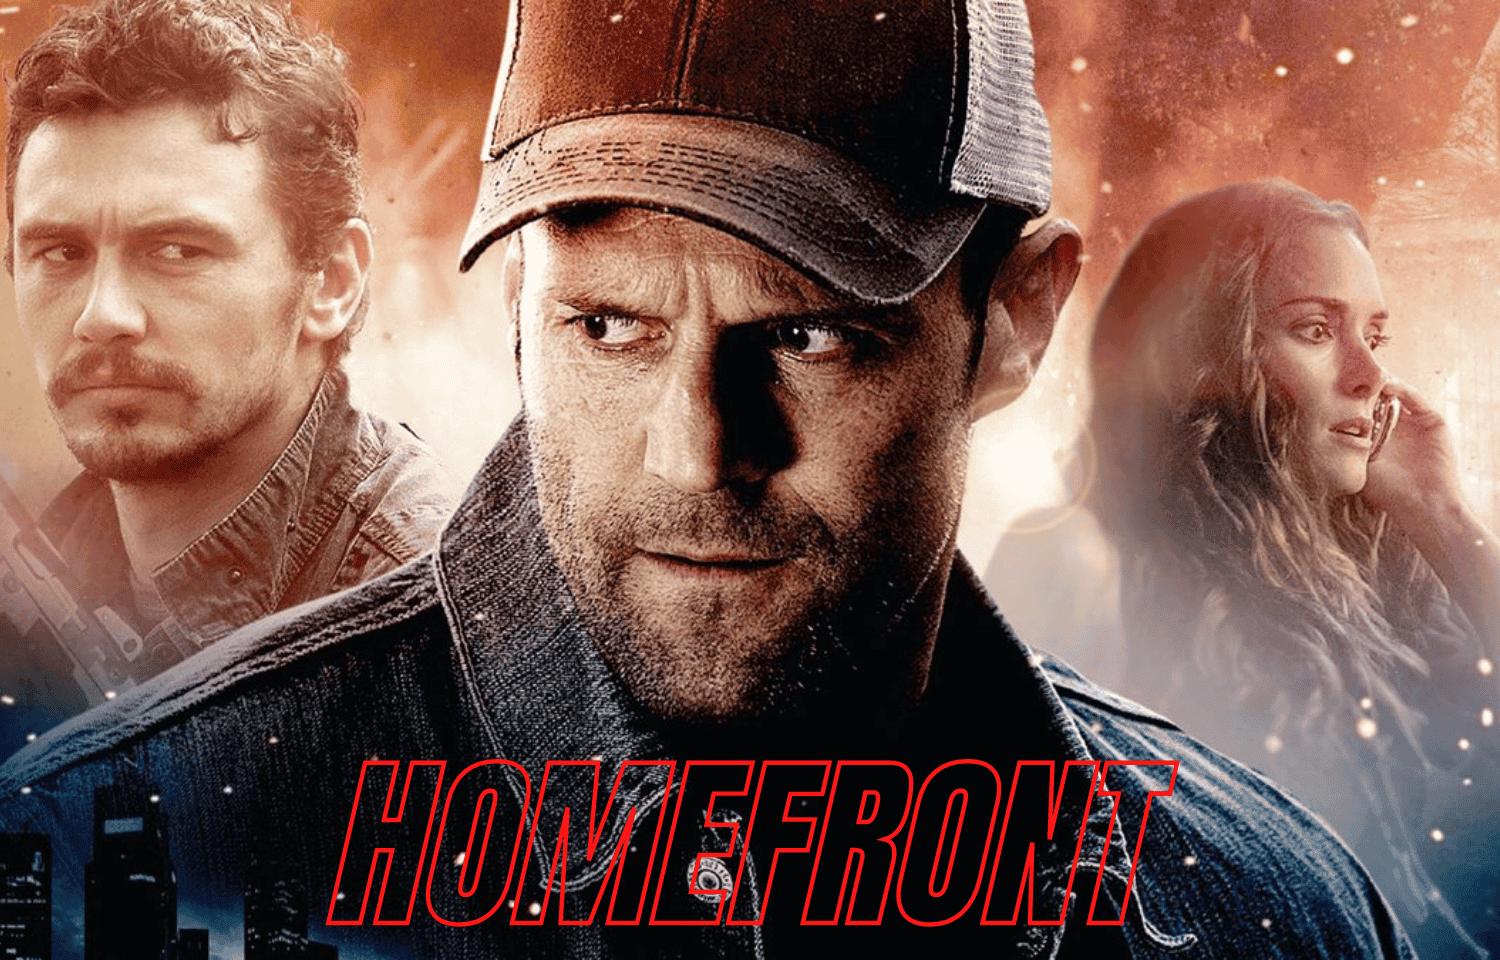 homefront cast